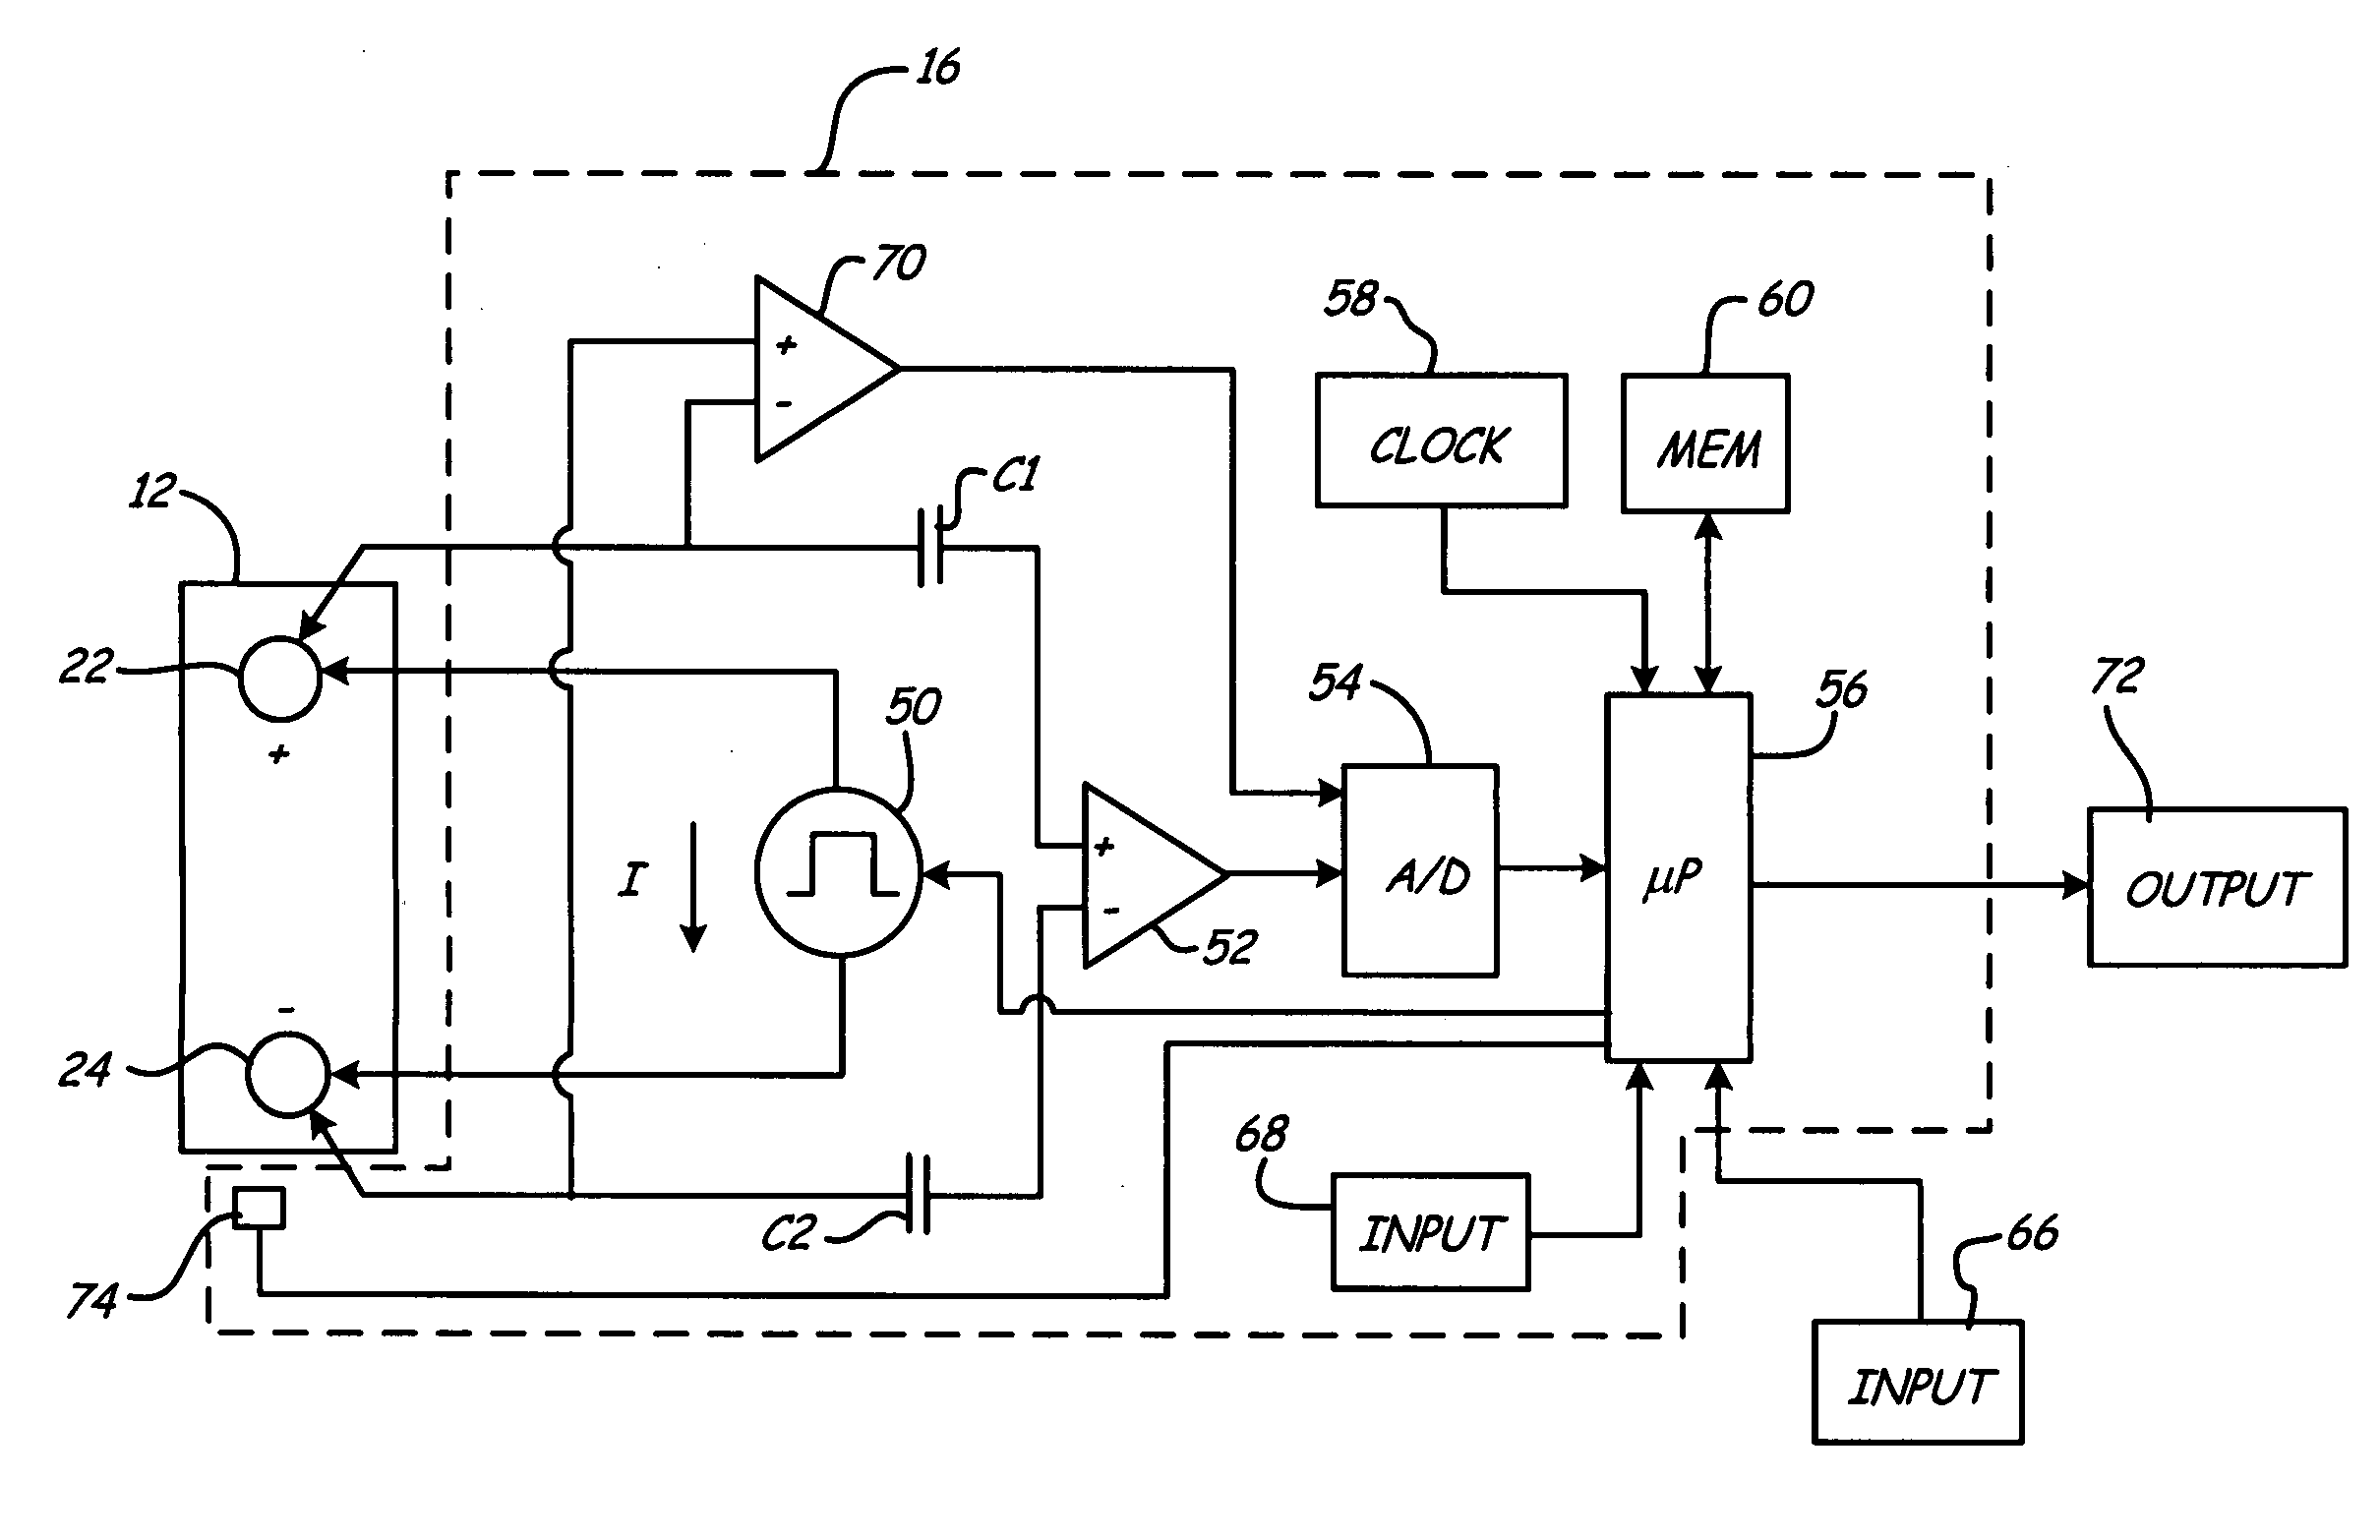 Apparatus and method for simulating a battery tester with a fixed resistance load